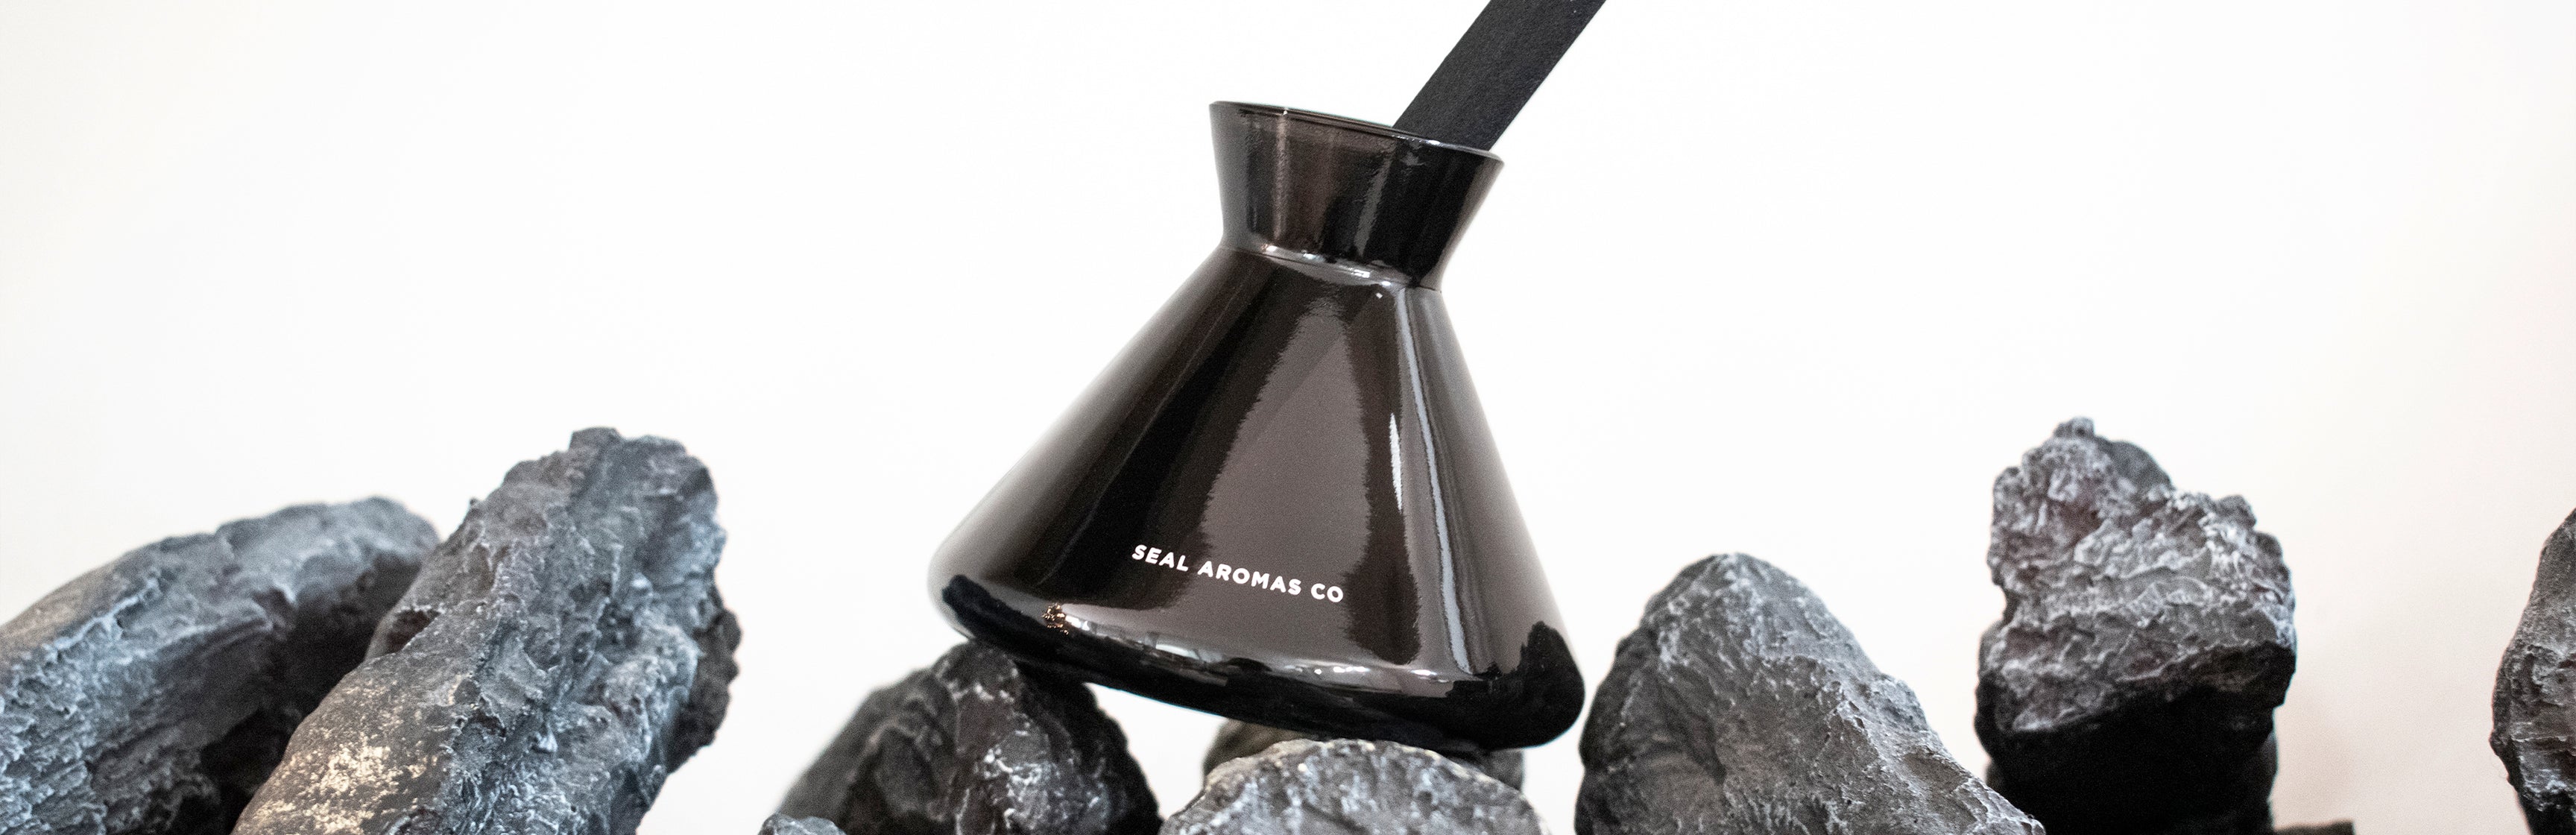 BannerAlchemy Reed Diffuser